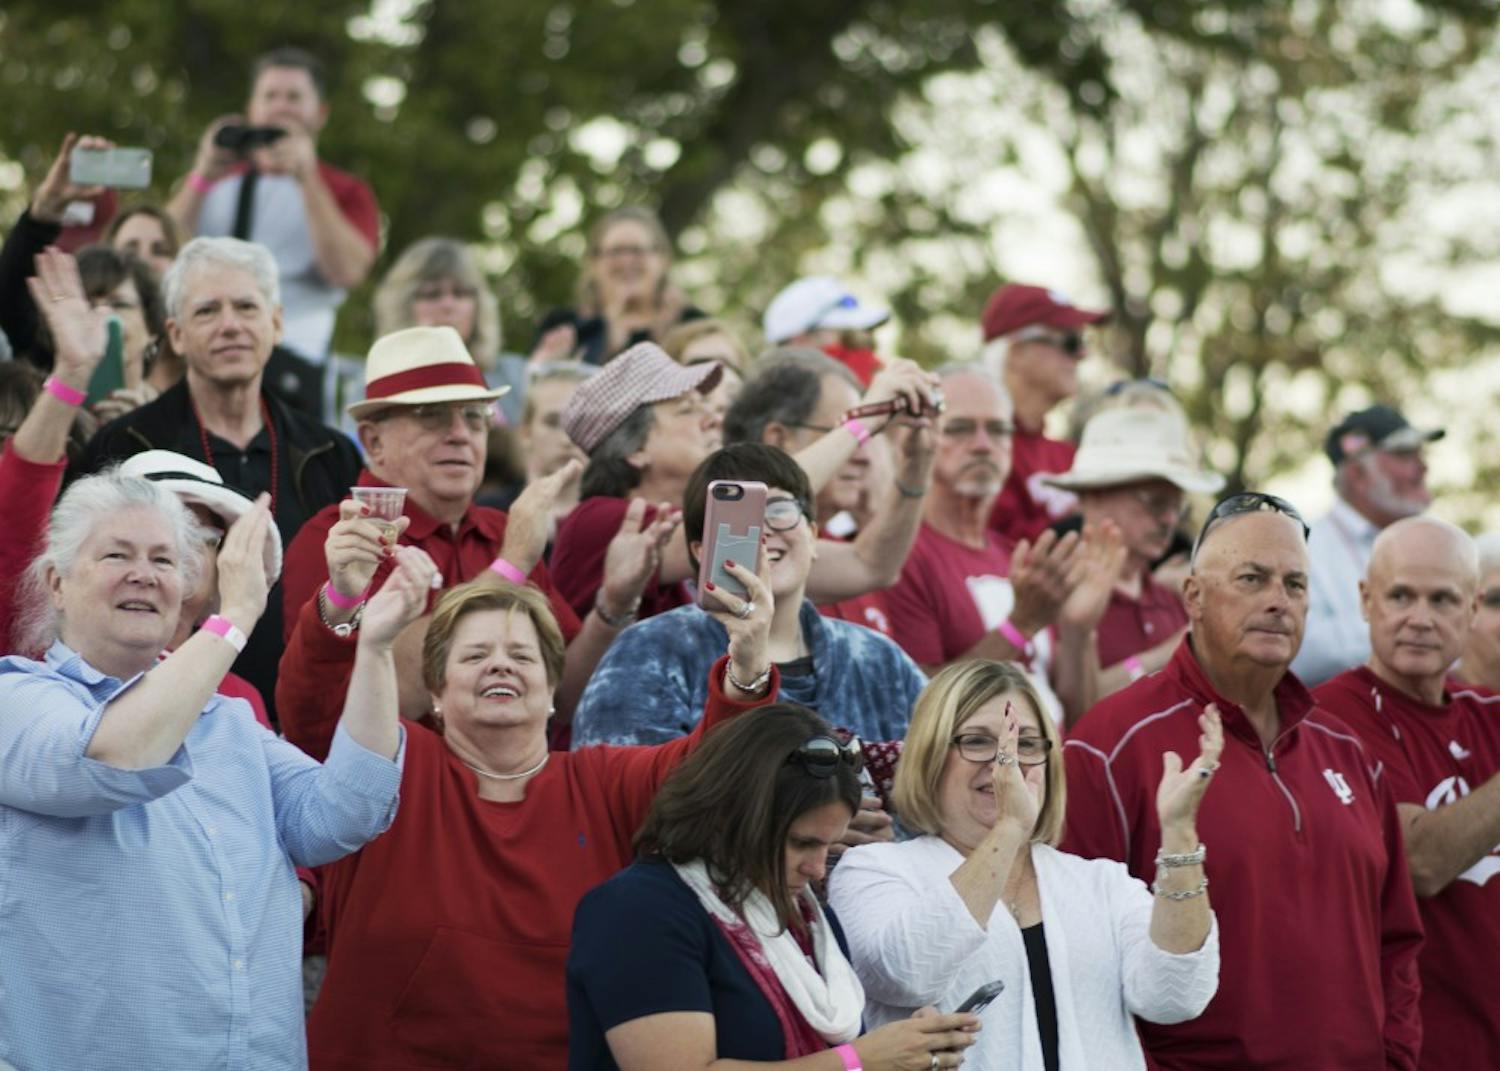 Parade spectators cheer as the Marching Hundred perform at the intersection of 17th Street and Woodlawn Avenue on Friday evening as part of the homecoming parade. The parade started at the Indiana Memorial Union and worked its way north to the tailgating fields.&nbsp;